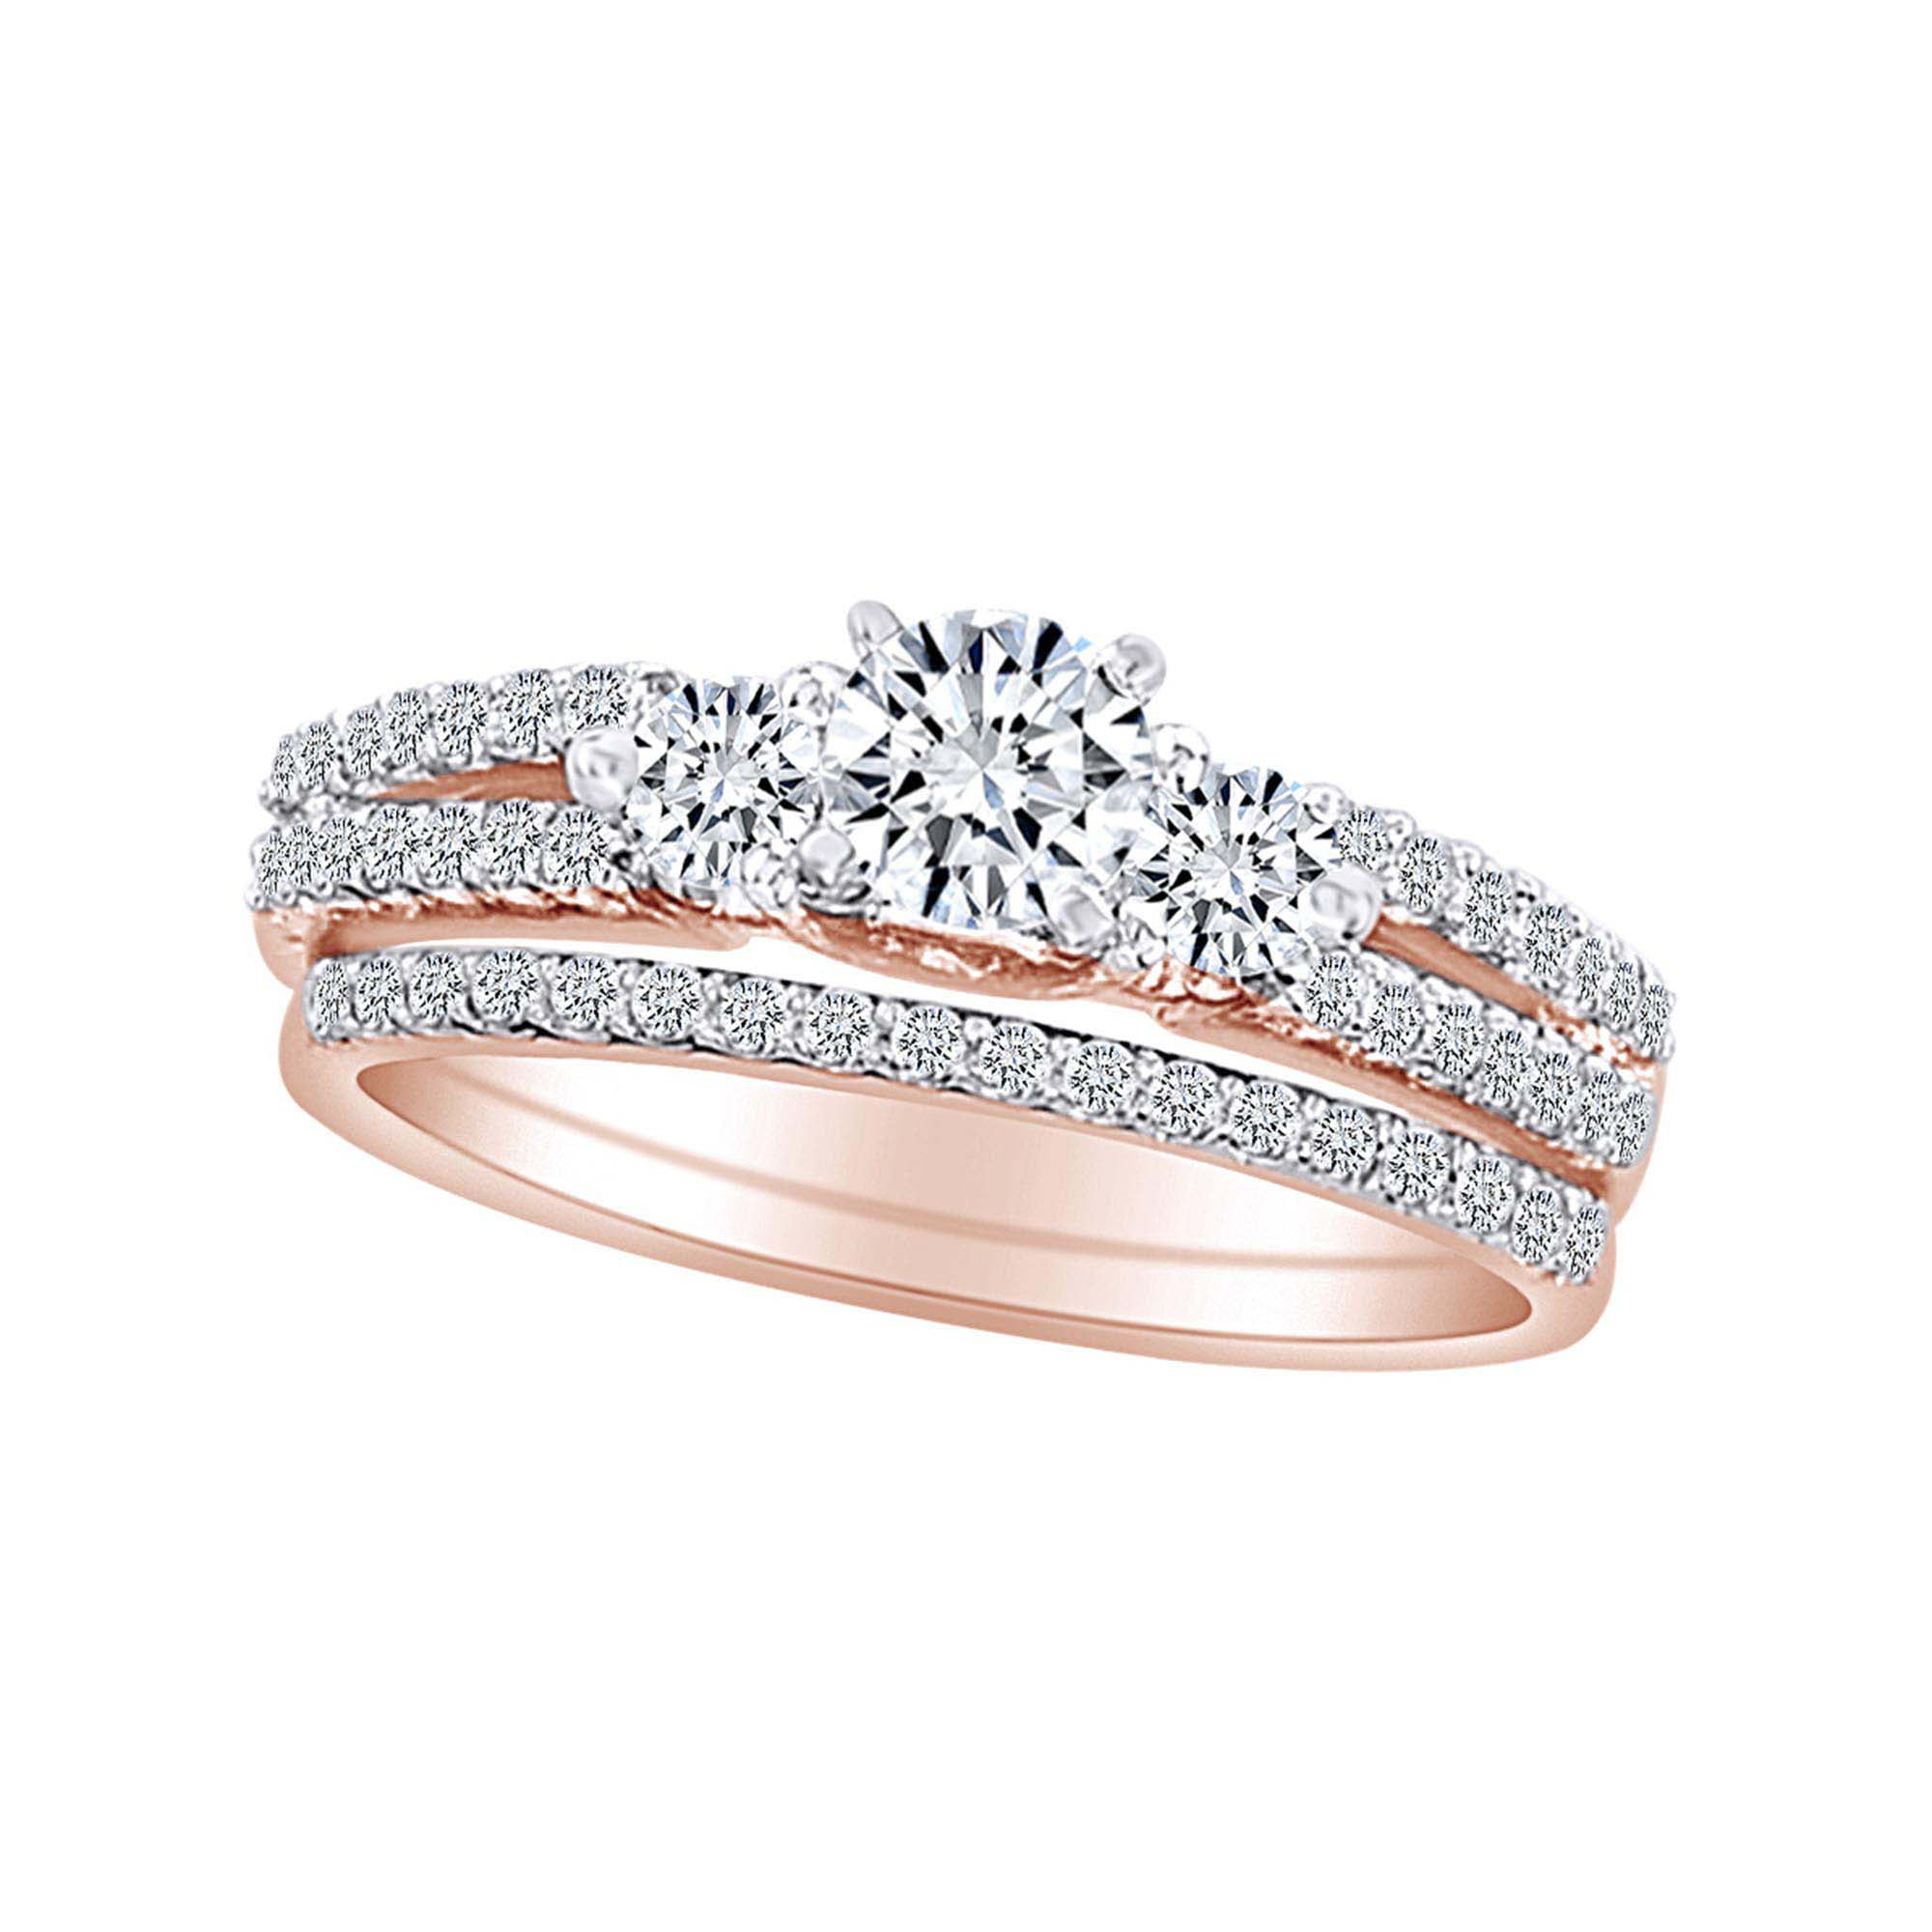 Details about   2.25cttw Diamond 5 Stone Engagement Ring Rose Gold Bridal Jewelry Ring For Women 